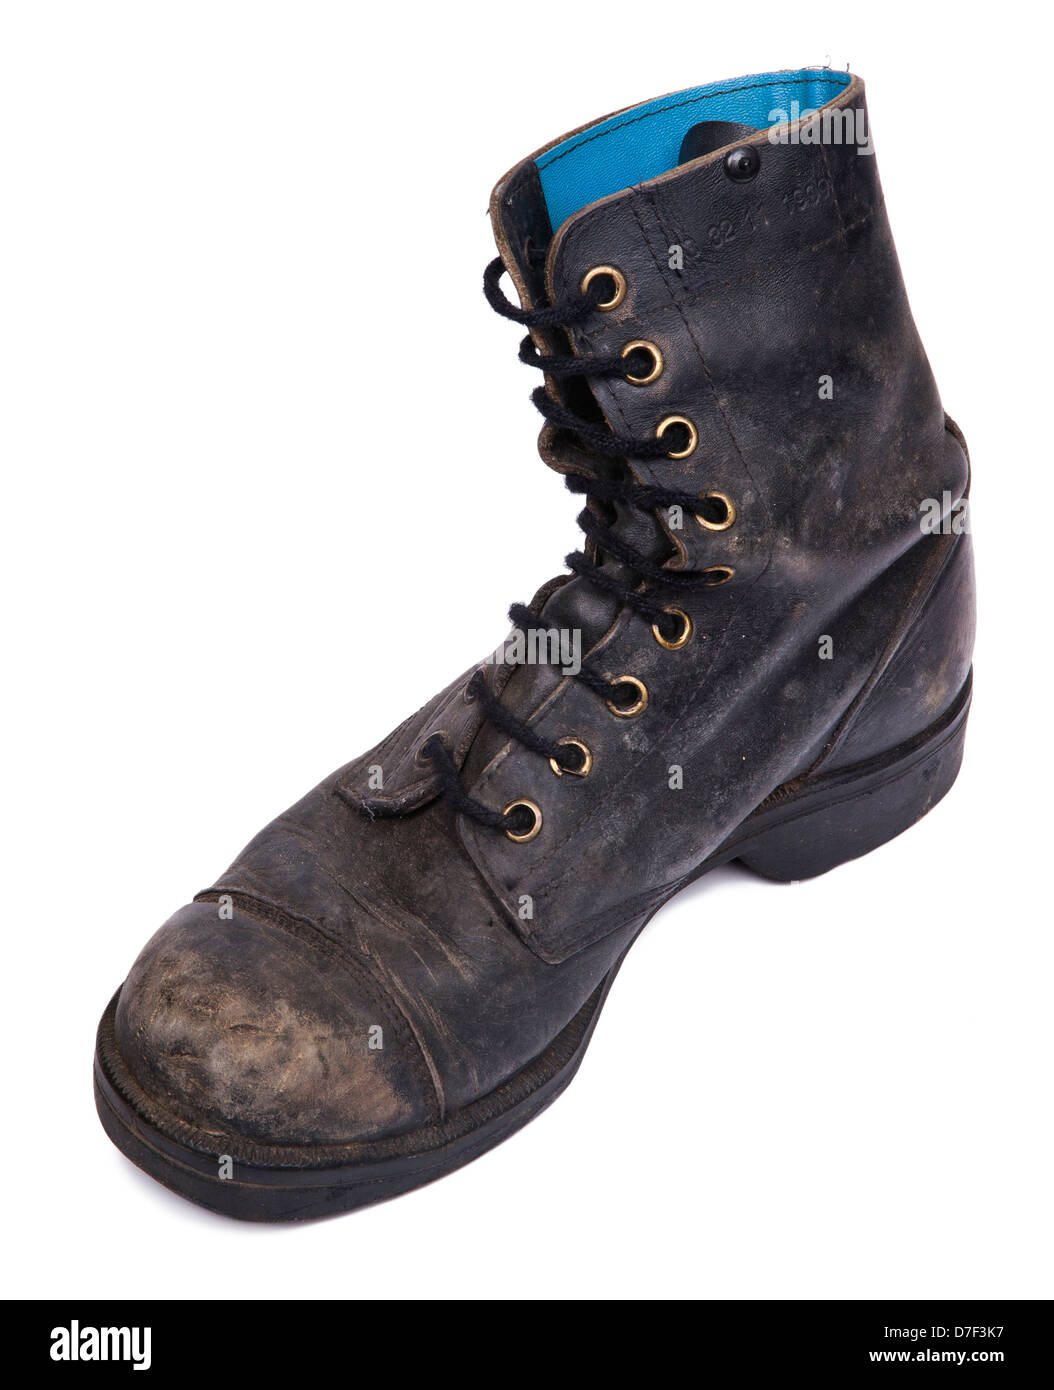 High angle diagonal view of a very worn right boot, issued by the Israeli army (IDF). isolated on white background. Stock Photo